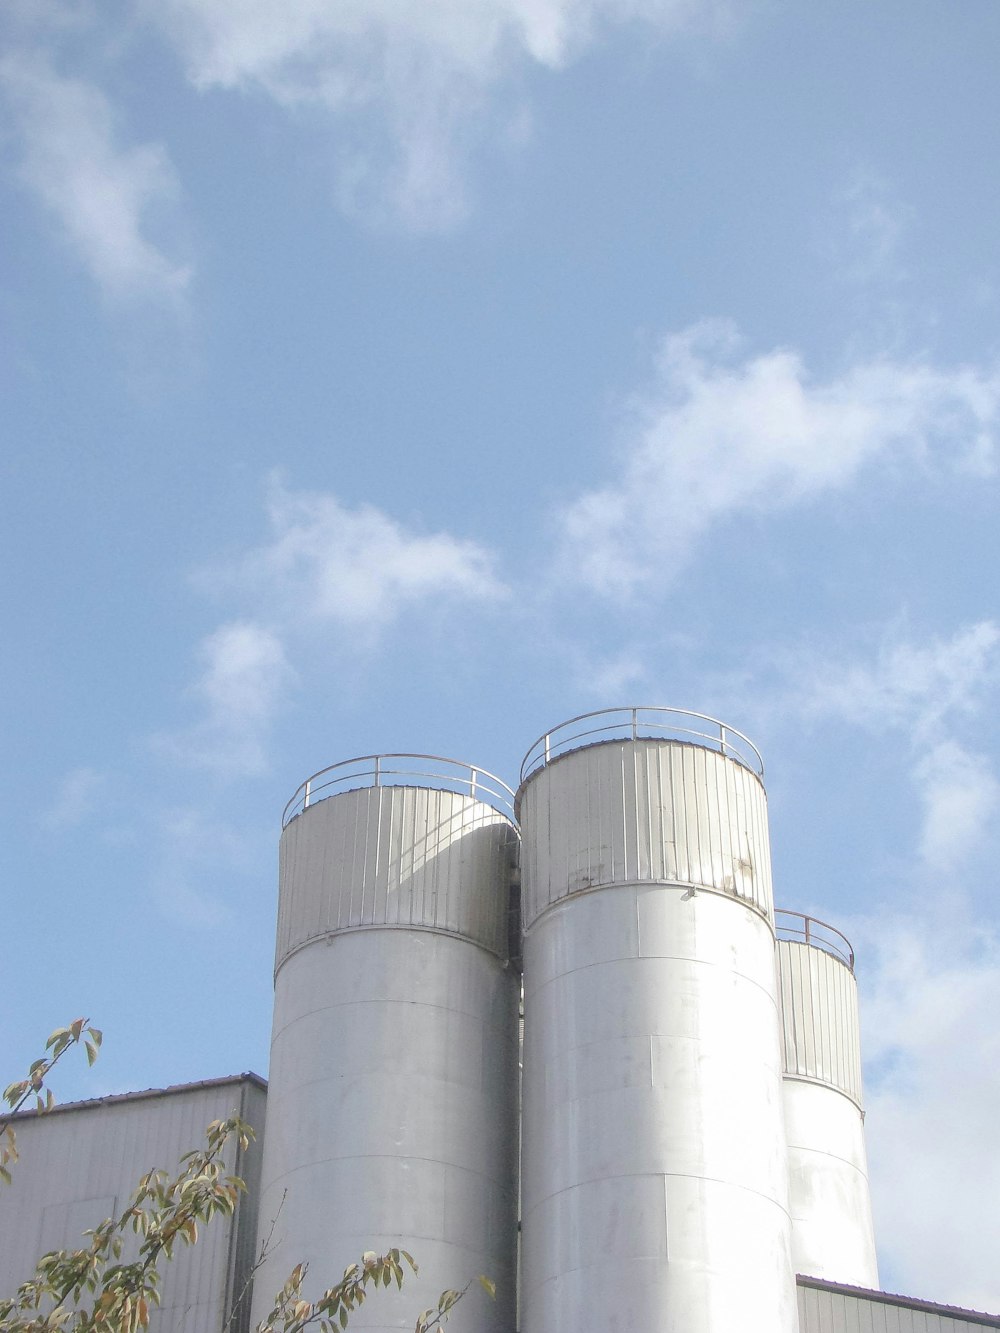 two silos against a blue sky with clouds